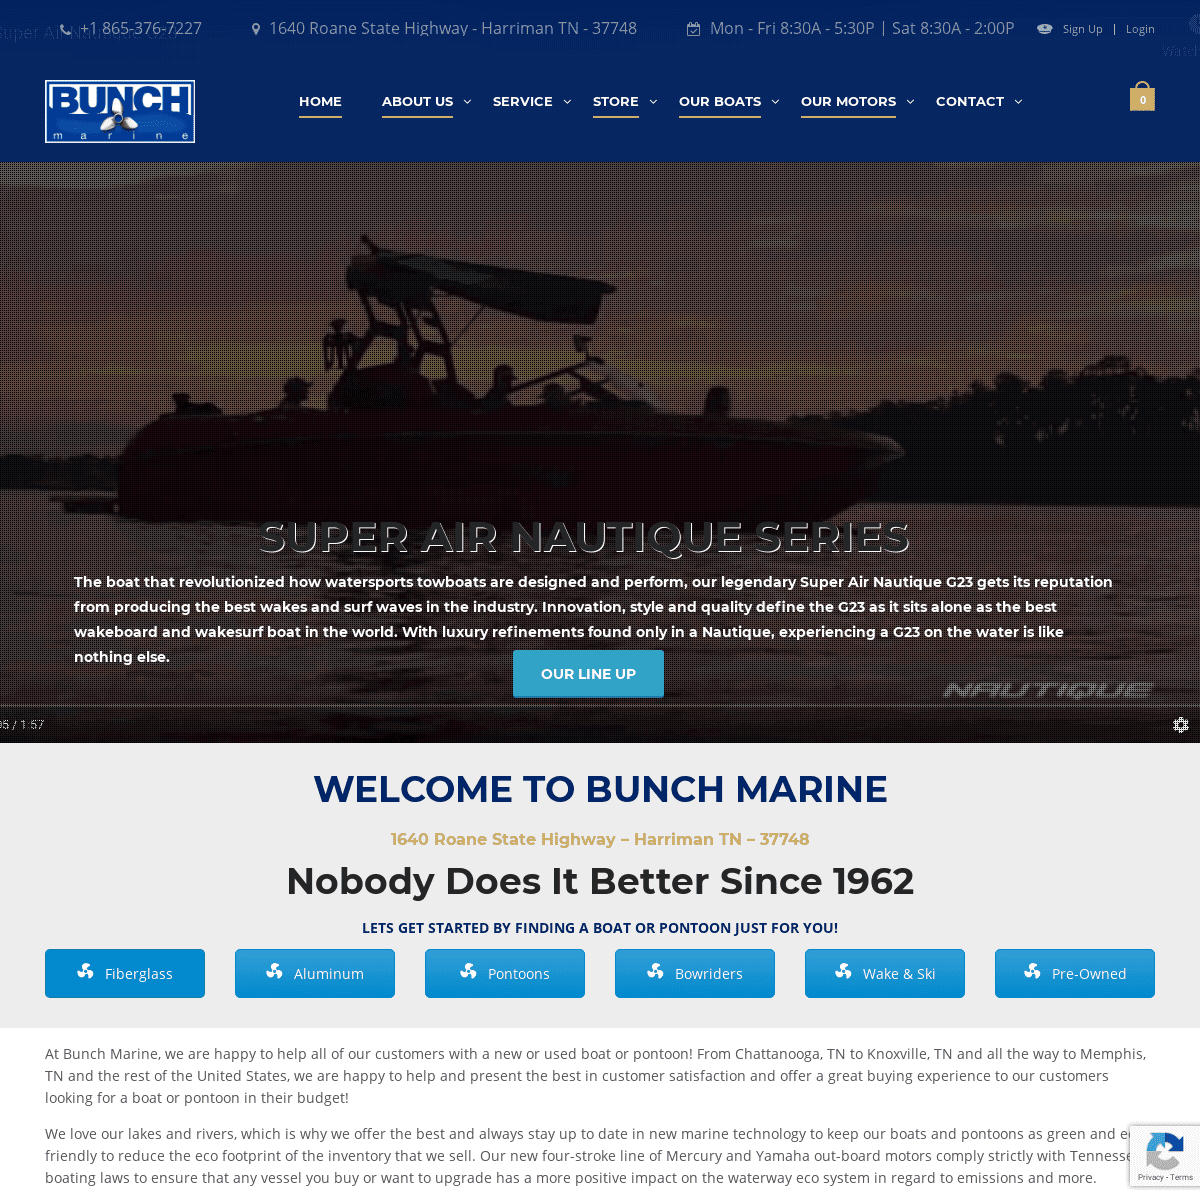 A complete backup of bunchmarine.com